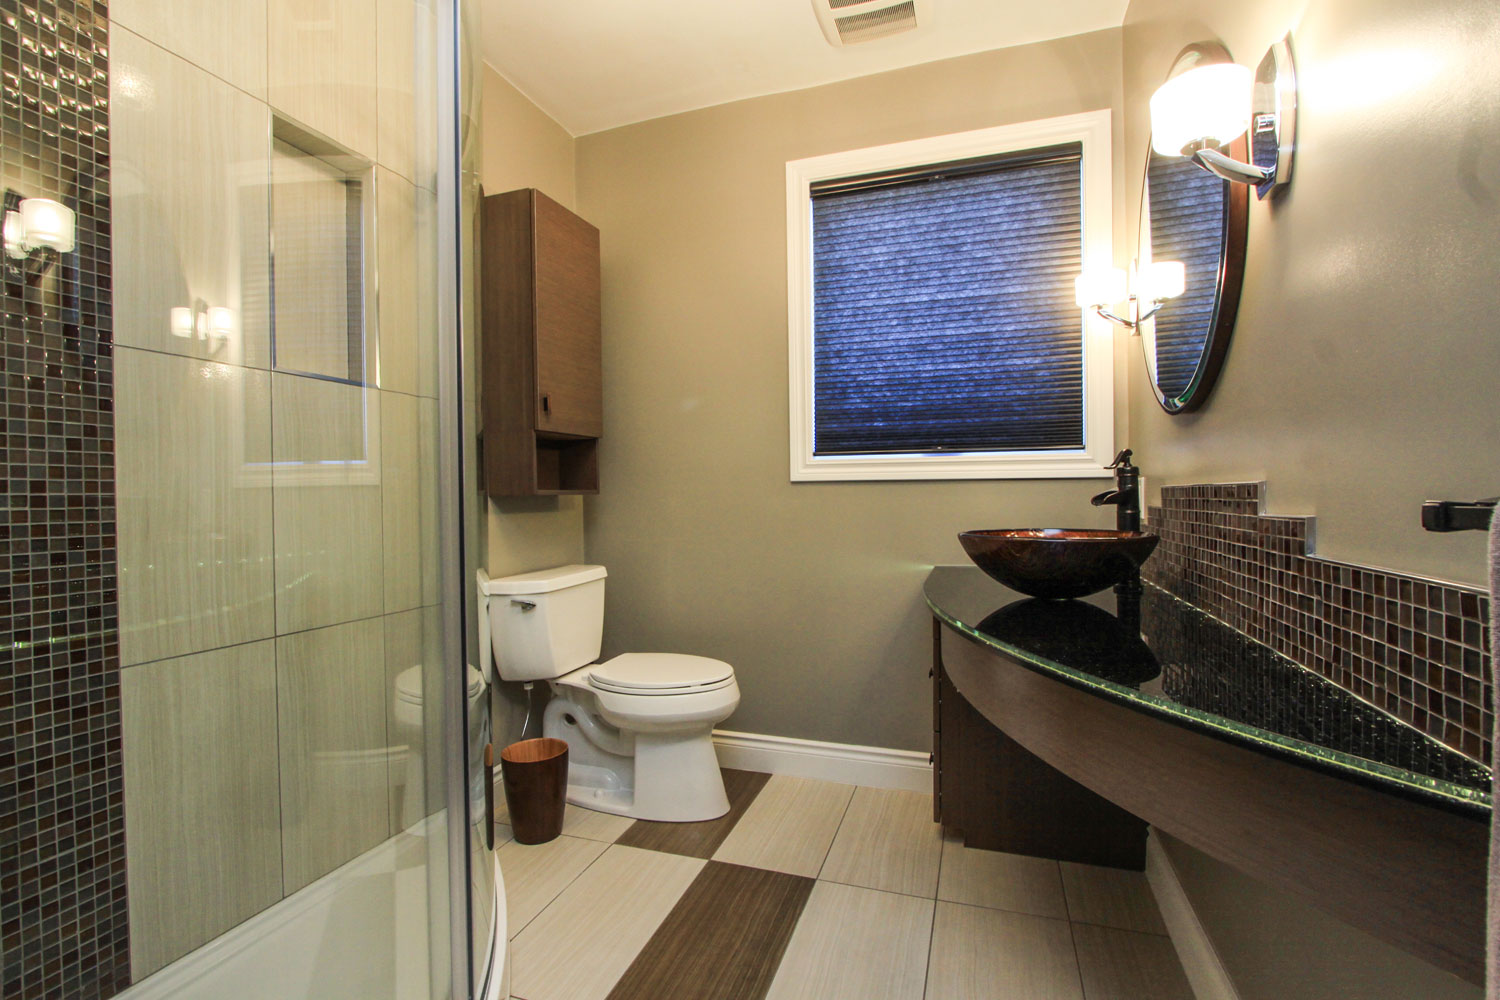 Eclectic modern main bathroom that features curved elements including a curved shower wall and vanity, round vessel sink, and circular mirror - Total Living Concepts in barrie ontario